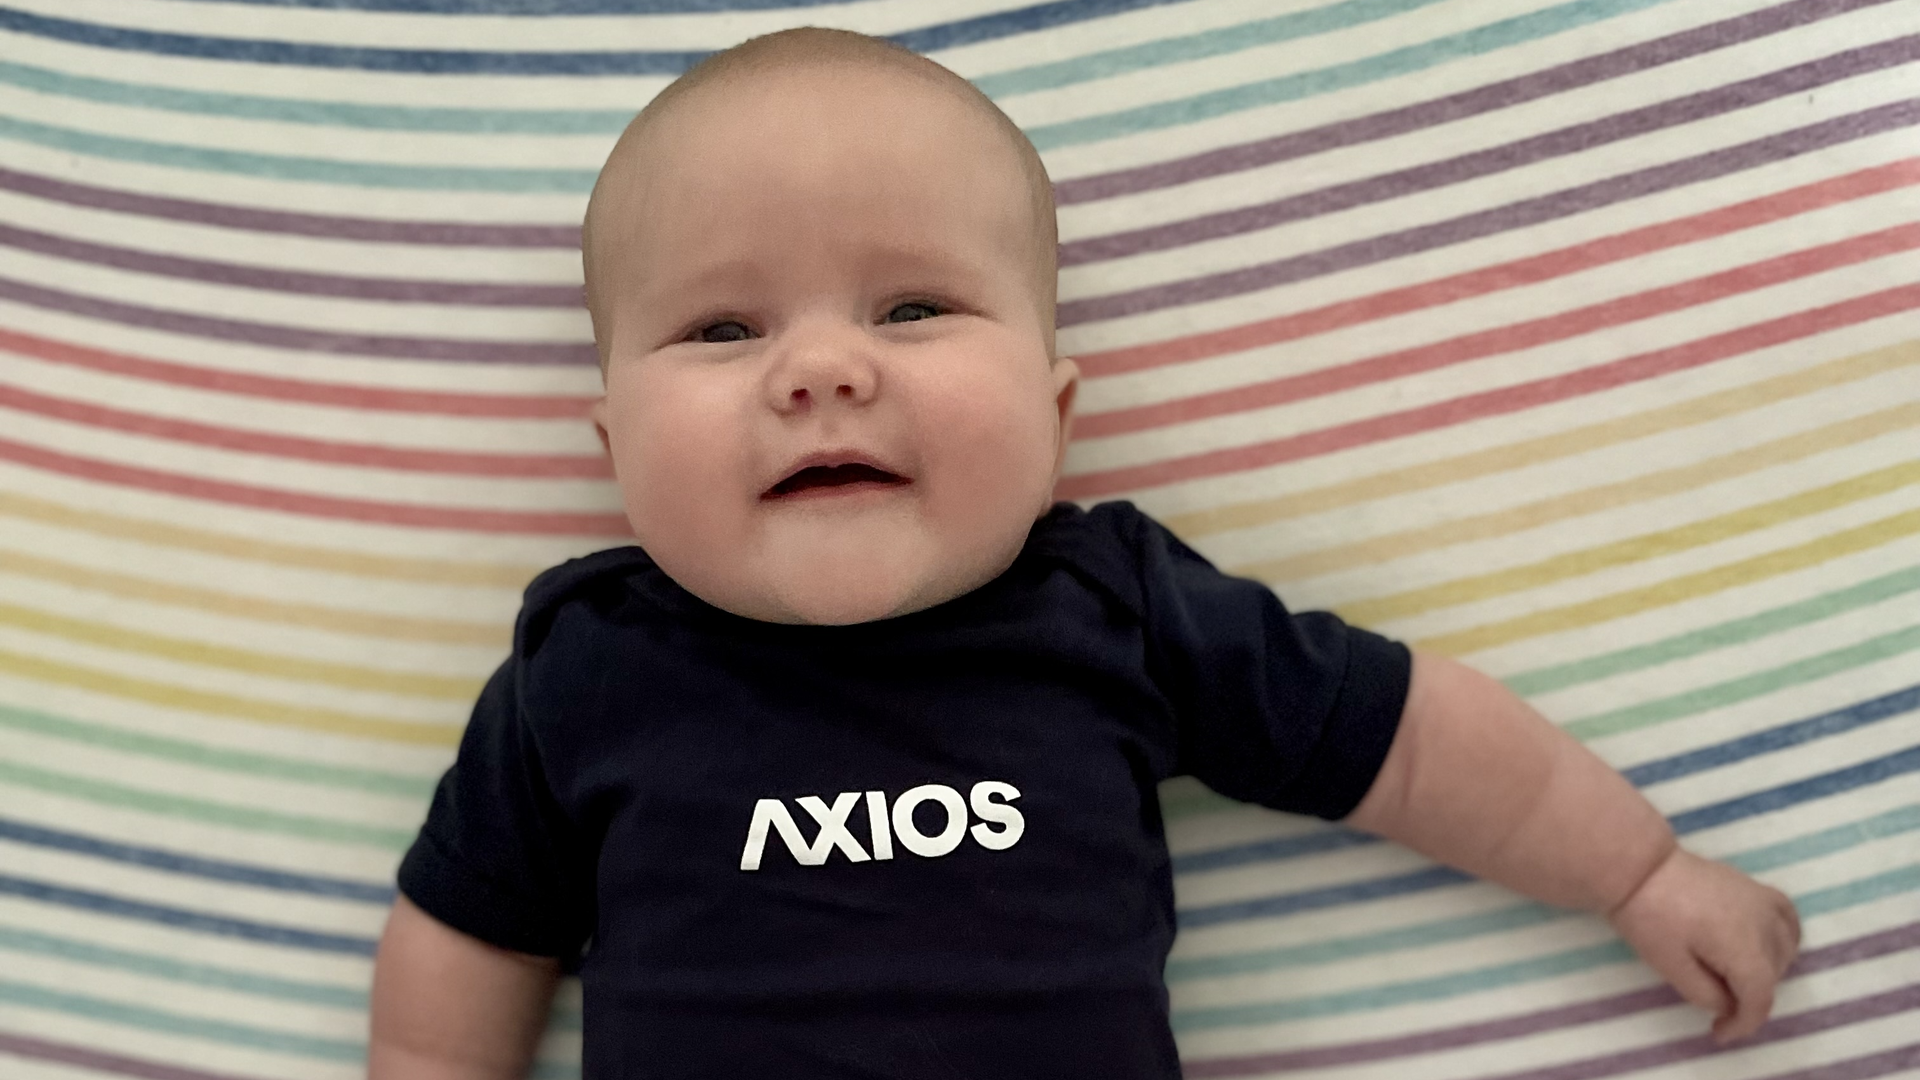 Meredith Briggs lays in her crib wearing an Axios onesie at 3 months old.